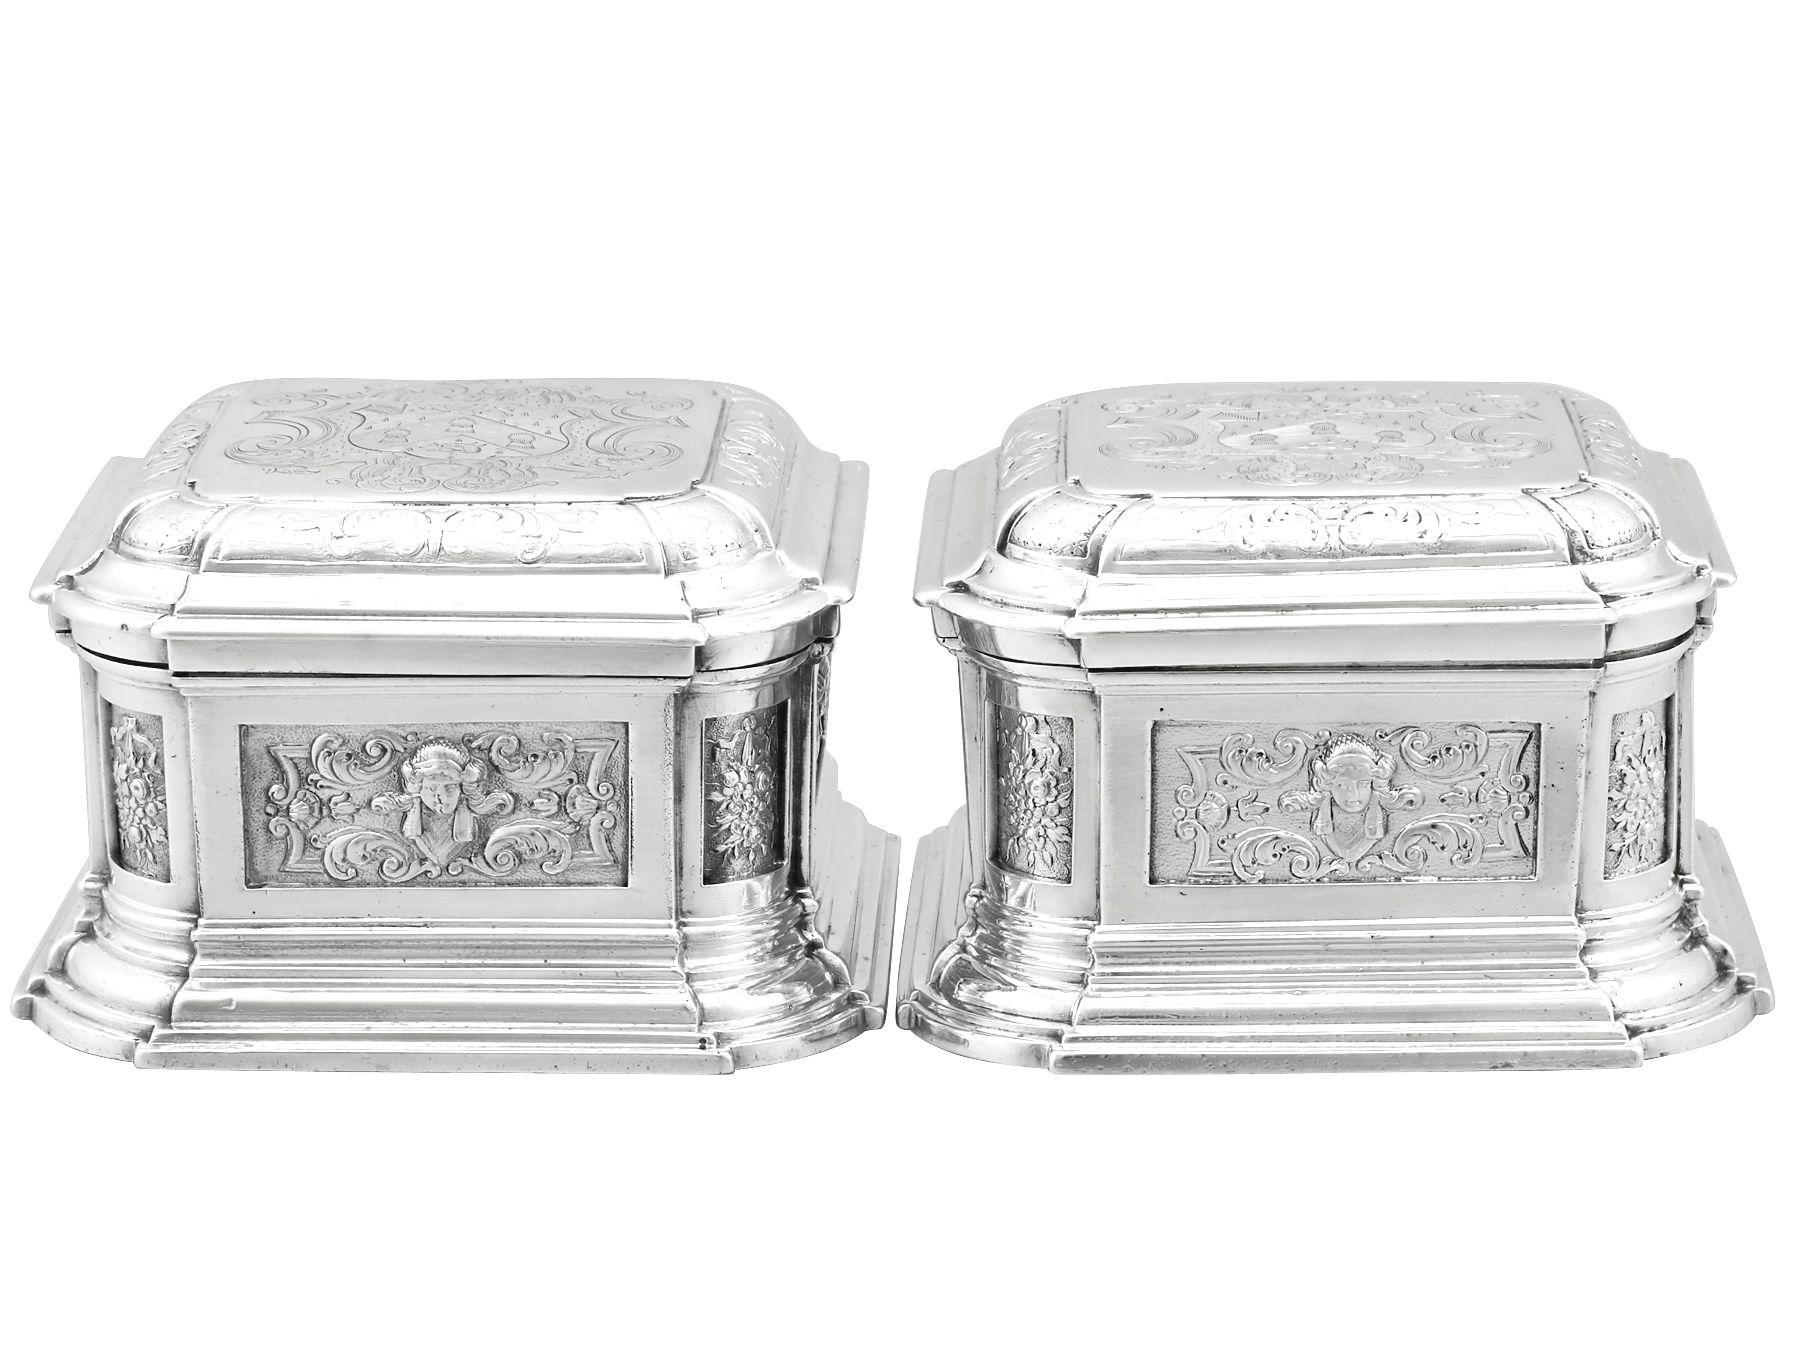 A magnificent, fine and impressive pair of antique George II English sterling silver toilet boxes; an addition to our Georgian silverware collection.
These magnificent antique George II sterling silver toilet boxes have a cut cornered square shaped